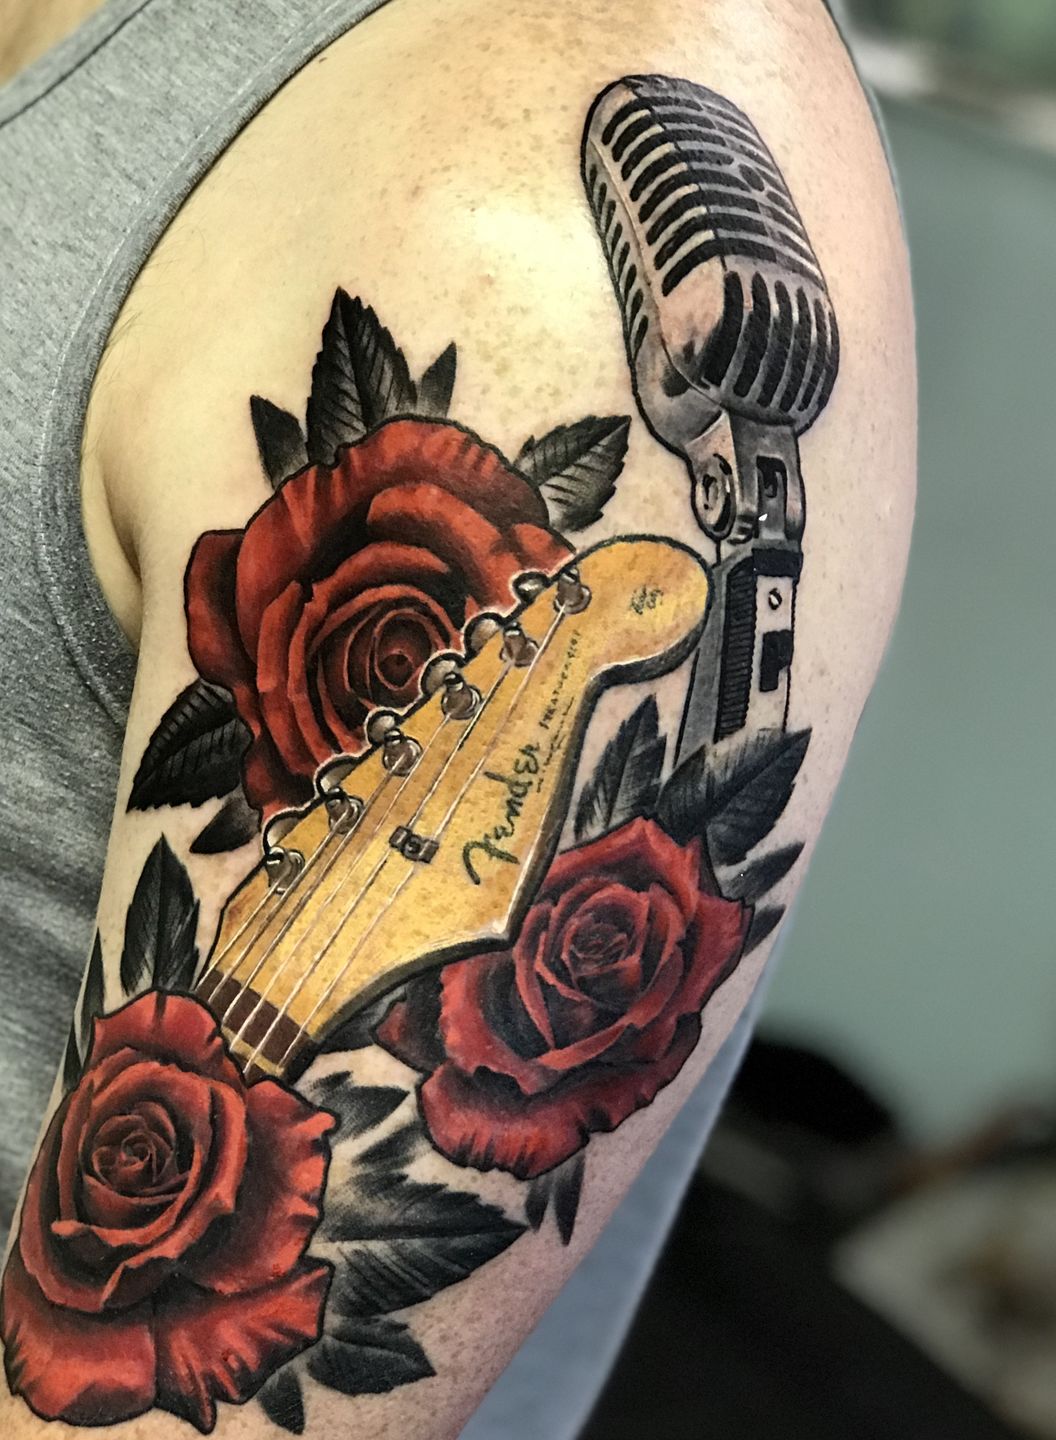 15 Best Guitar Tattoo Designs with Meanings! | Guitar tattoo design, Music  guitar tattoo, Guitar tattoo